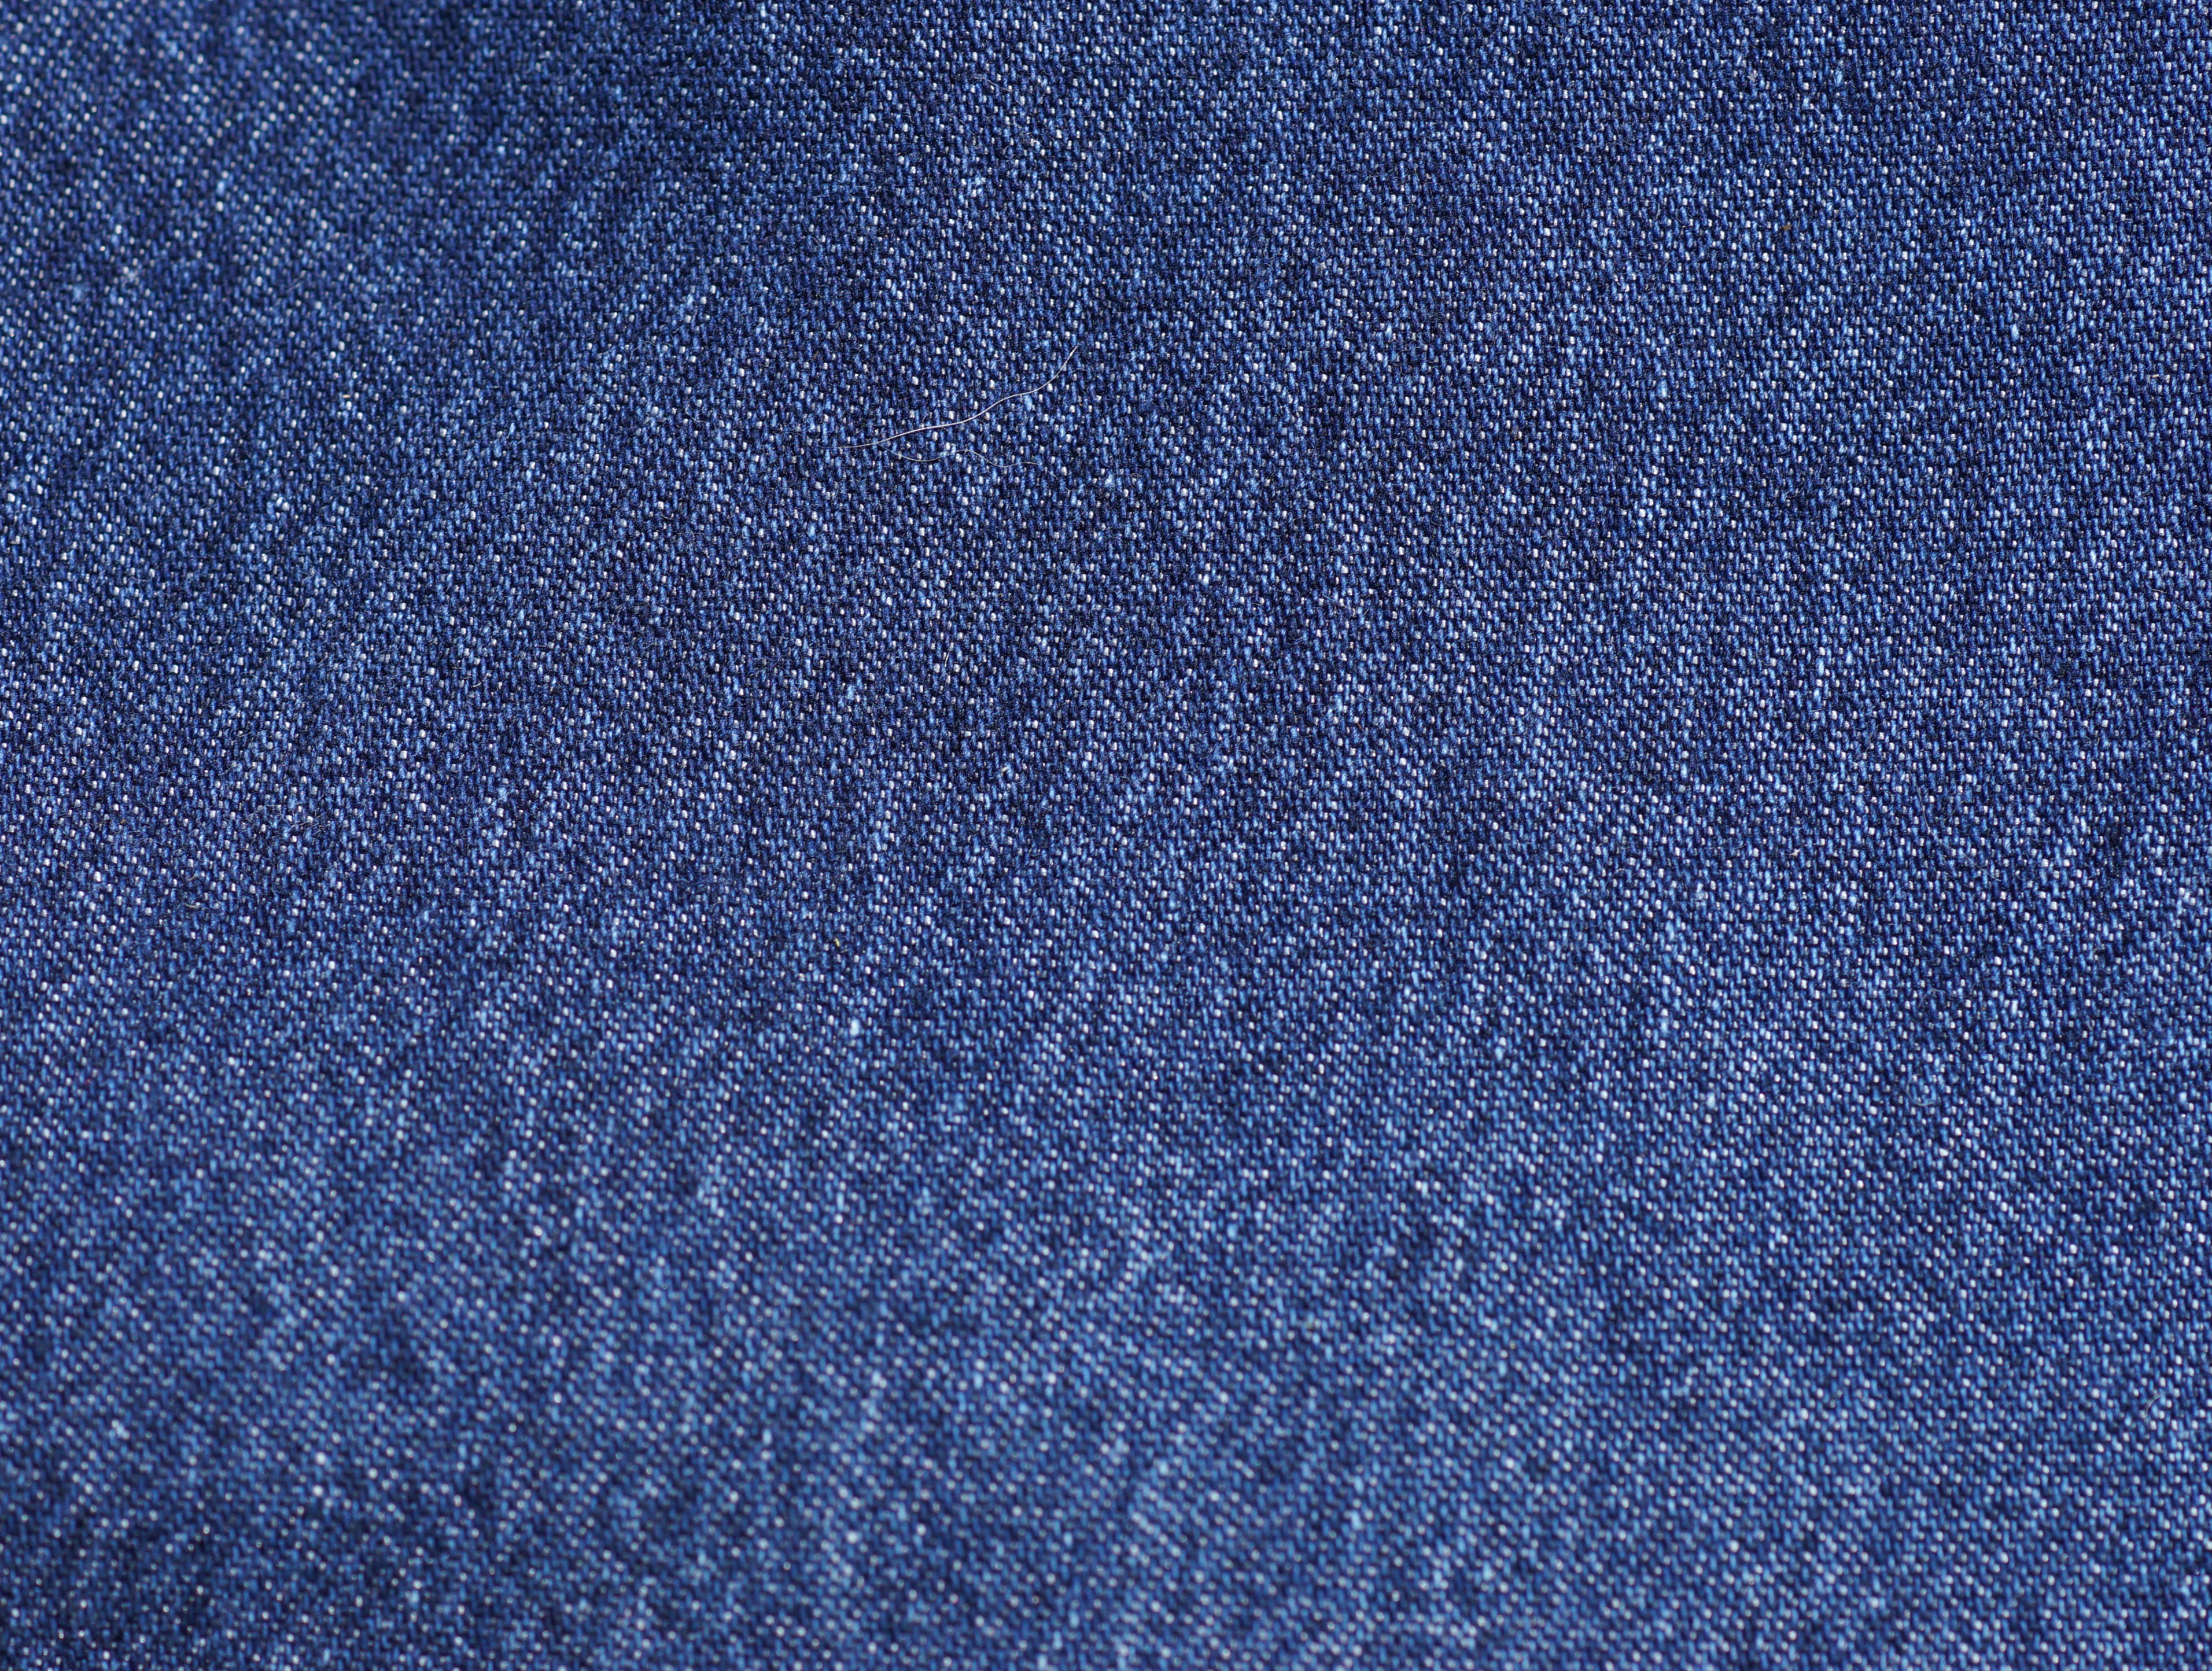 two-denim-backgrounds-or-blue-jean-textures-www-myfreetextures